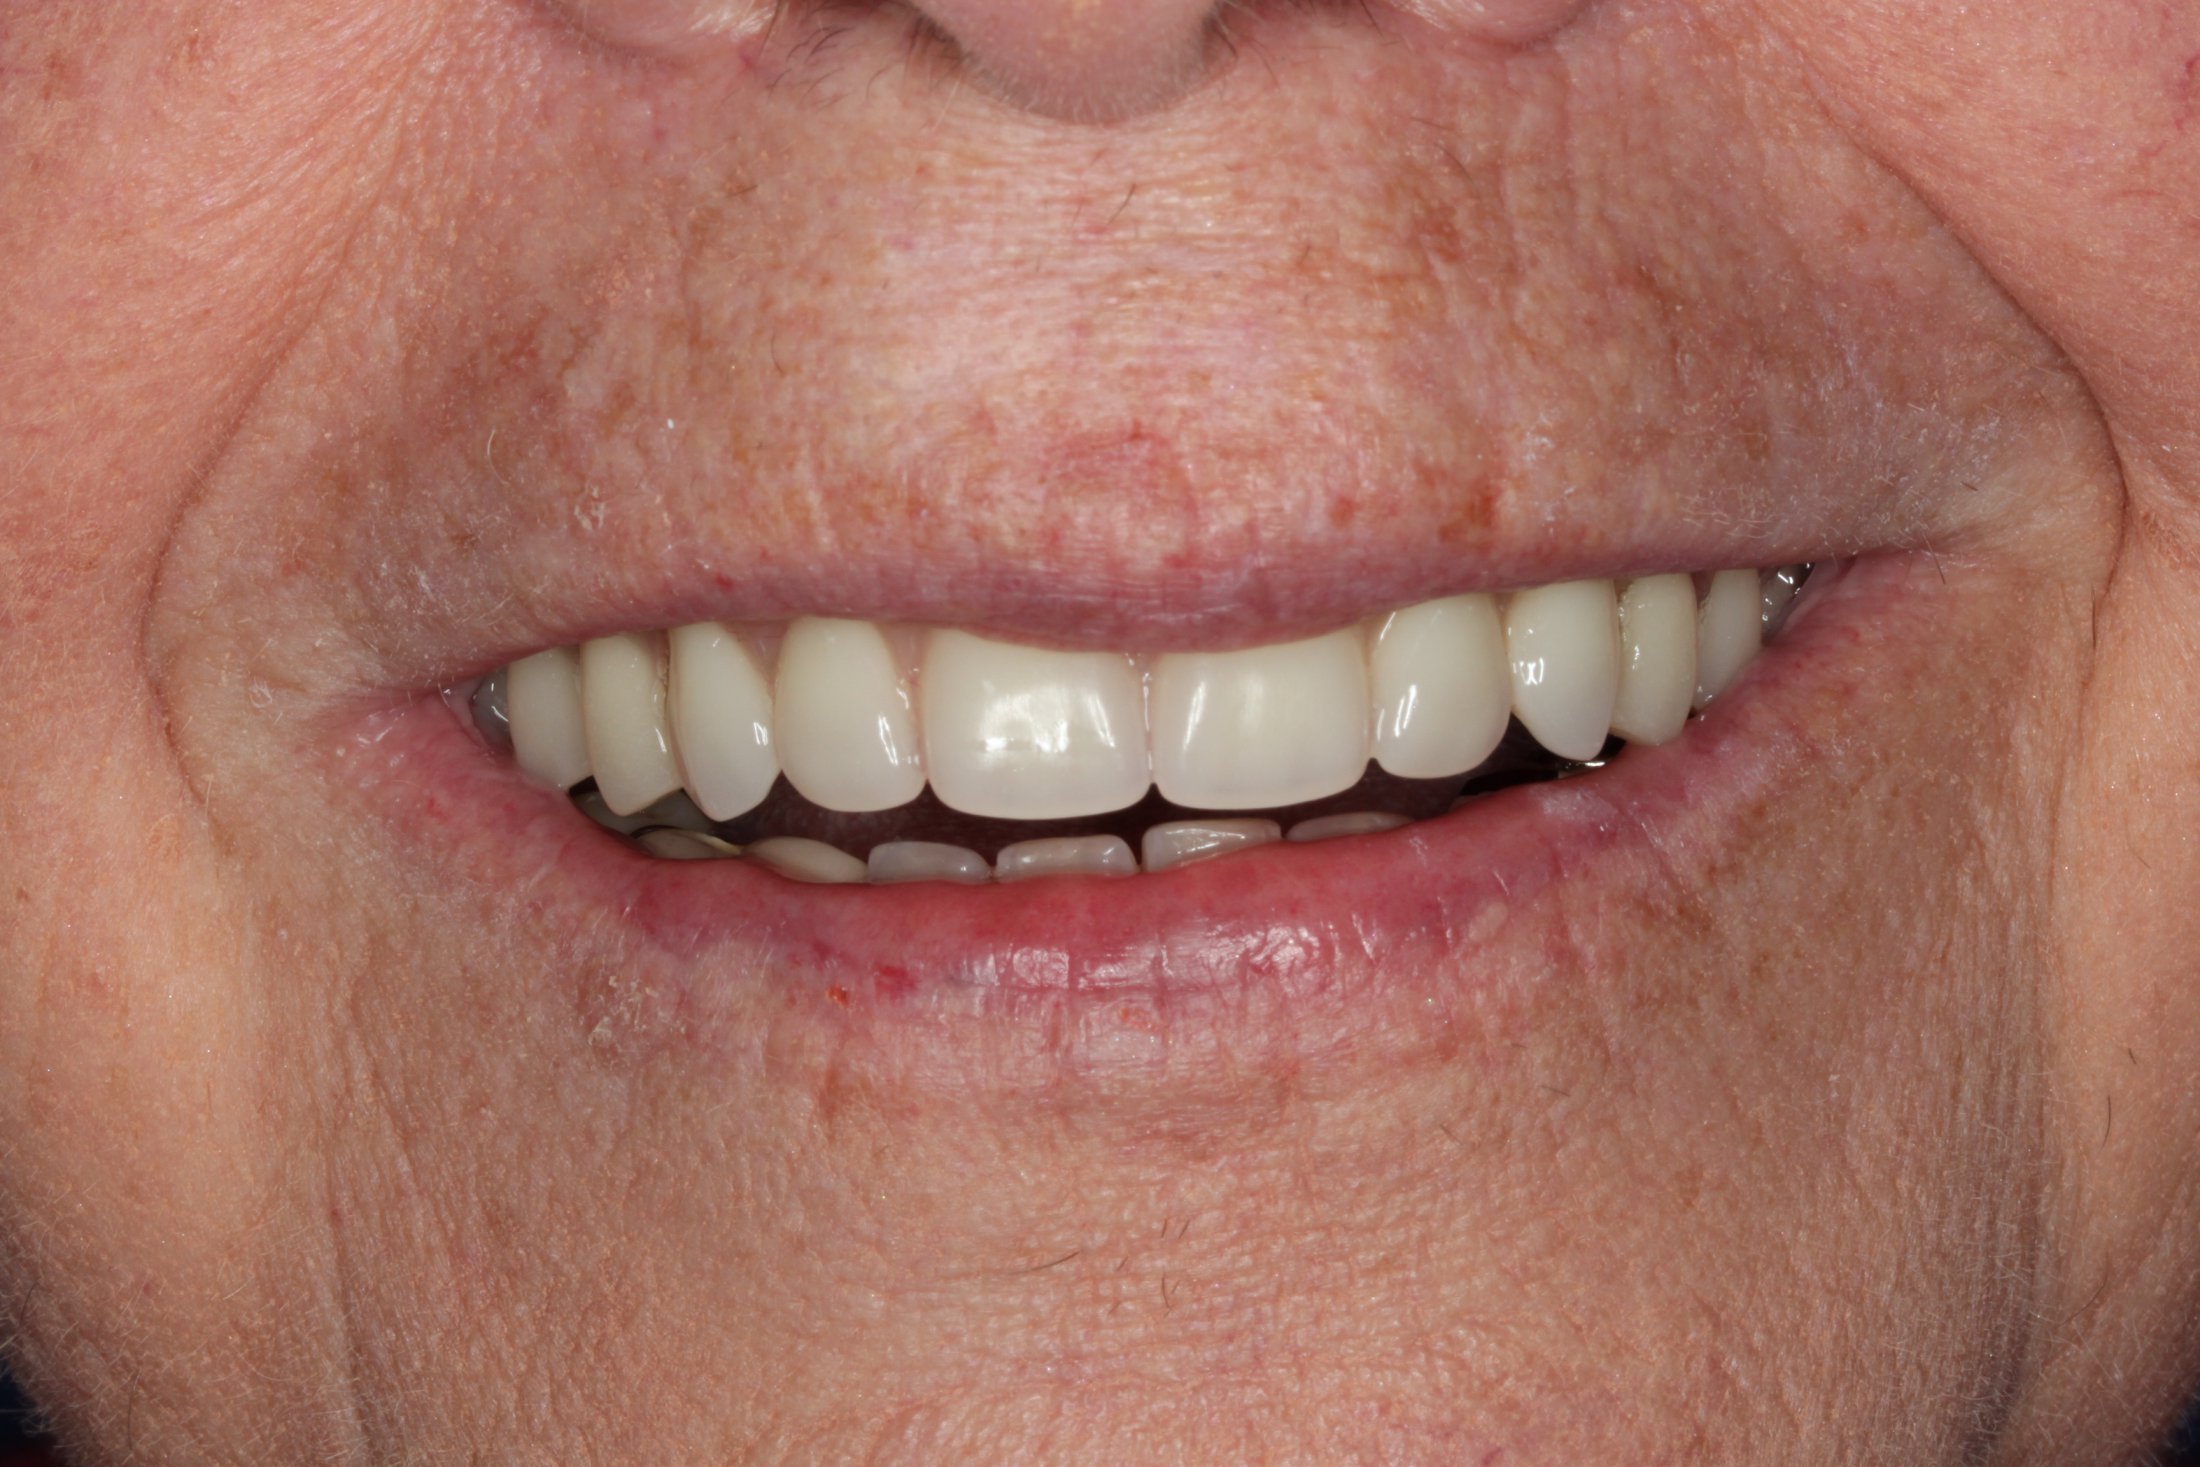 A brand new smile after maxillary denture